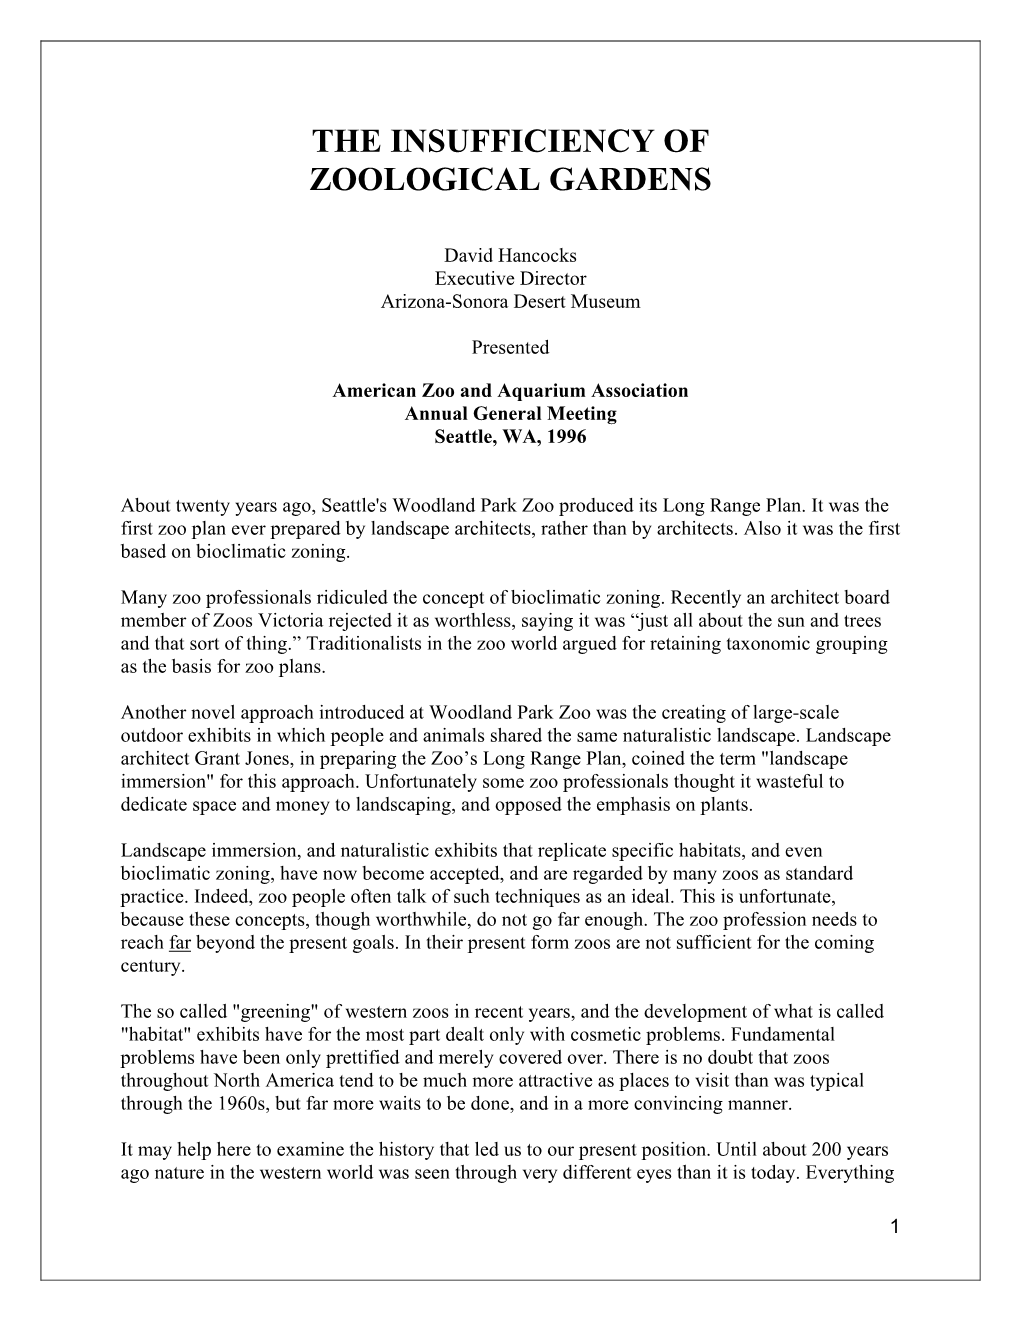 The Insufficiency of Zoological Gardens